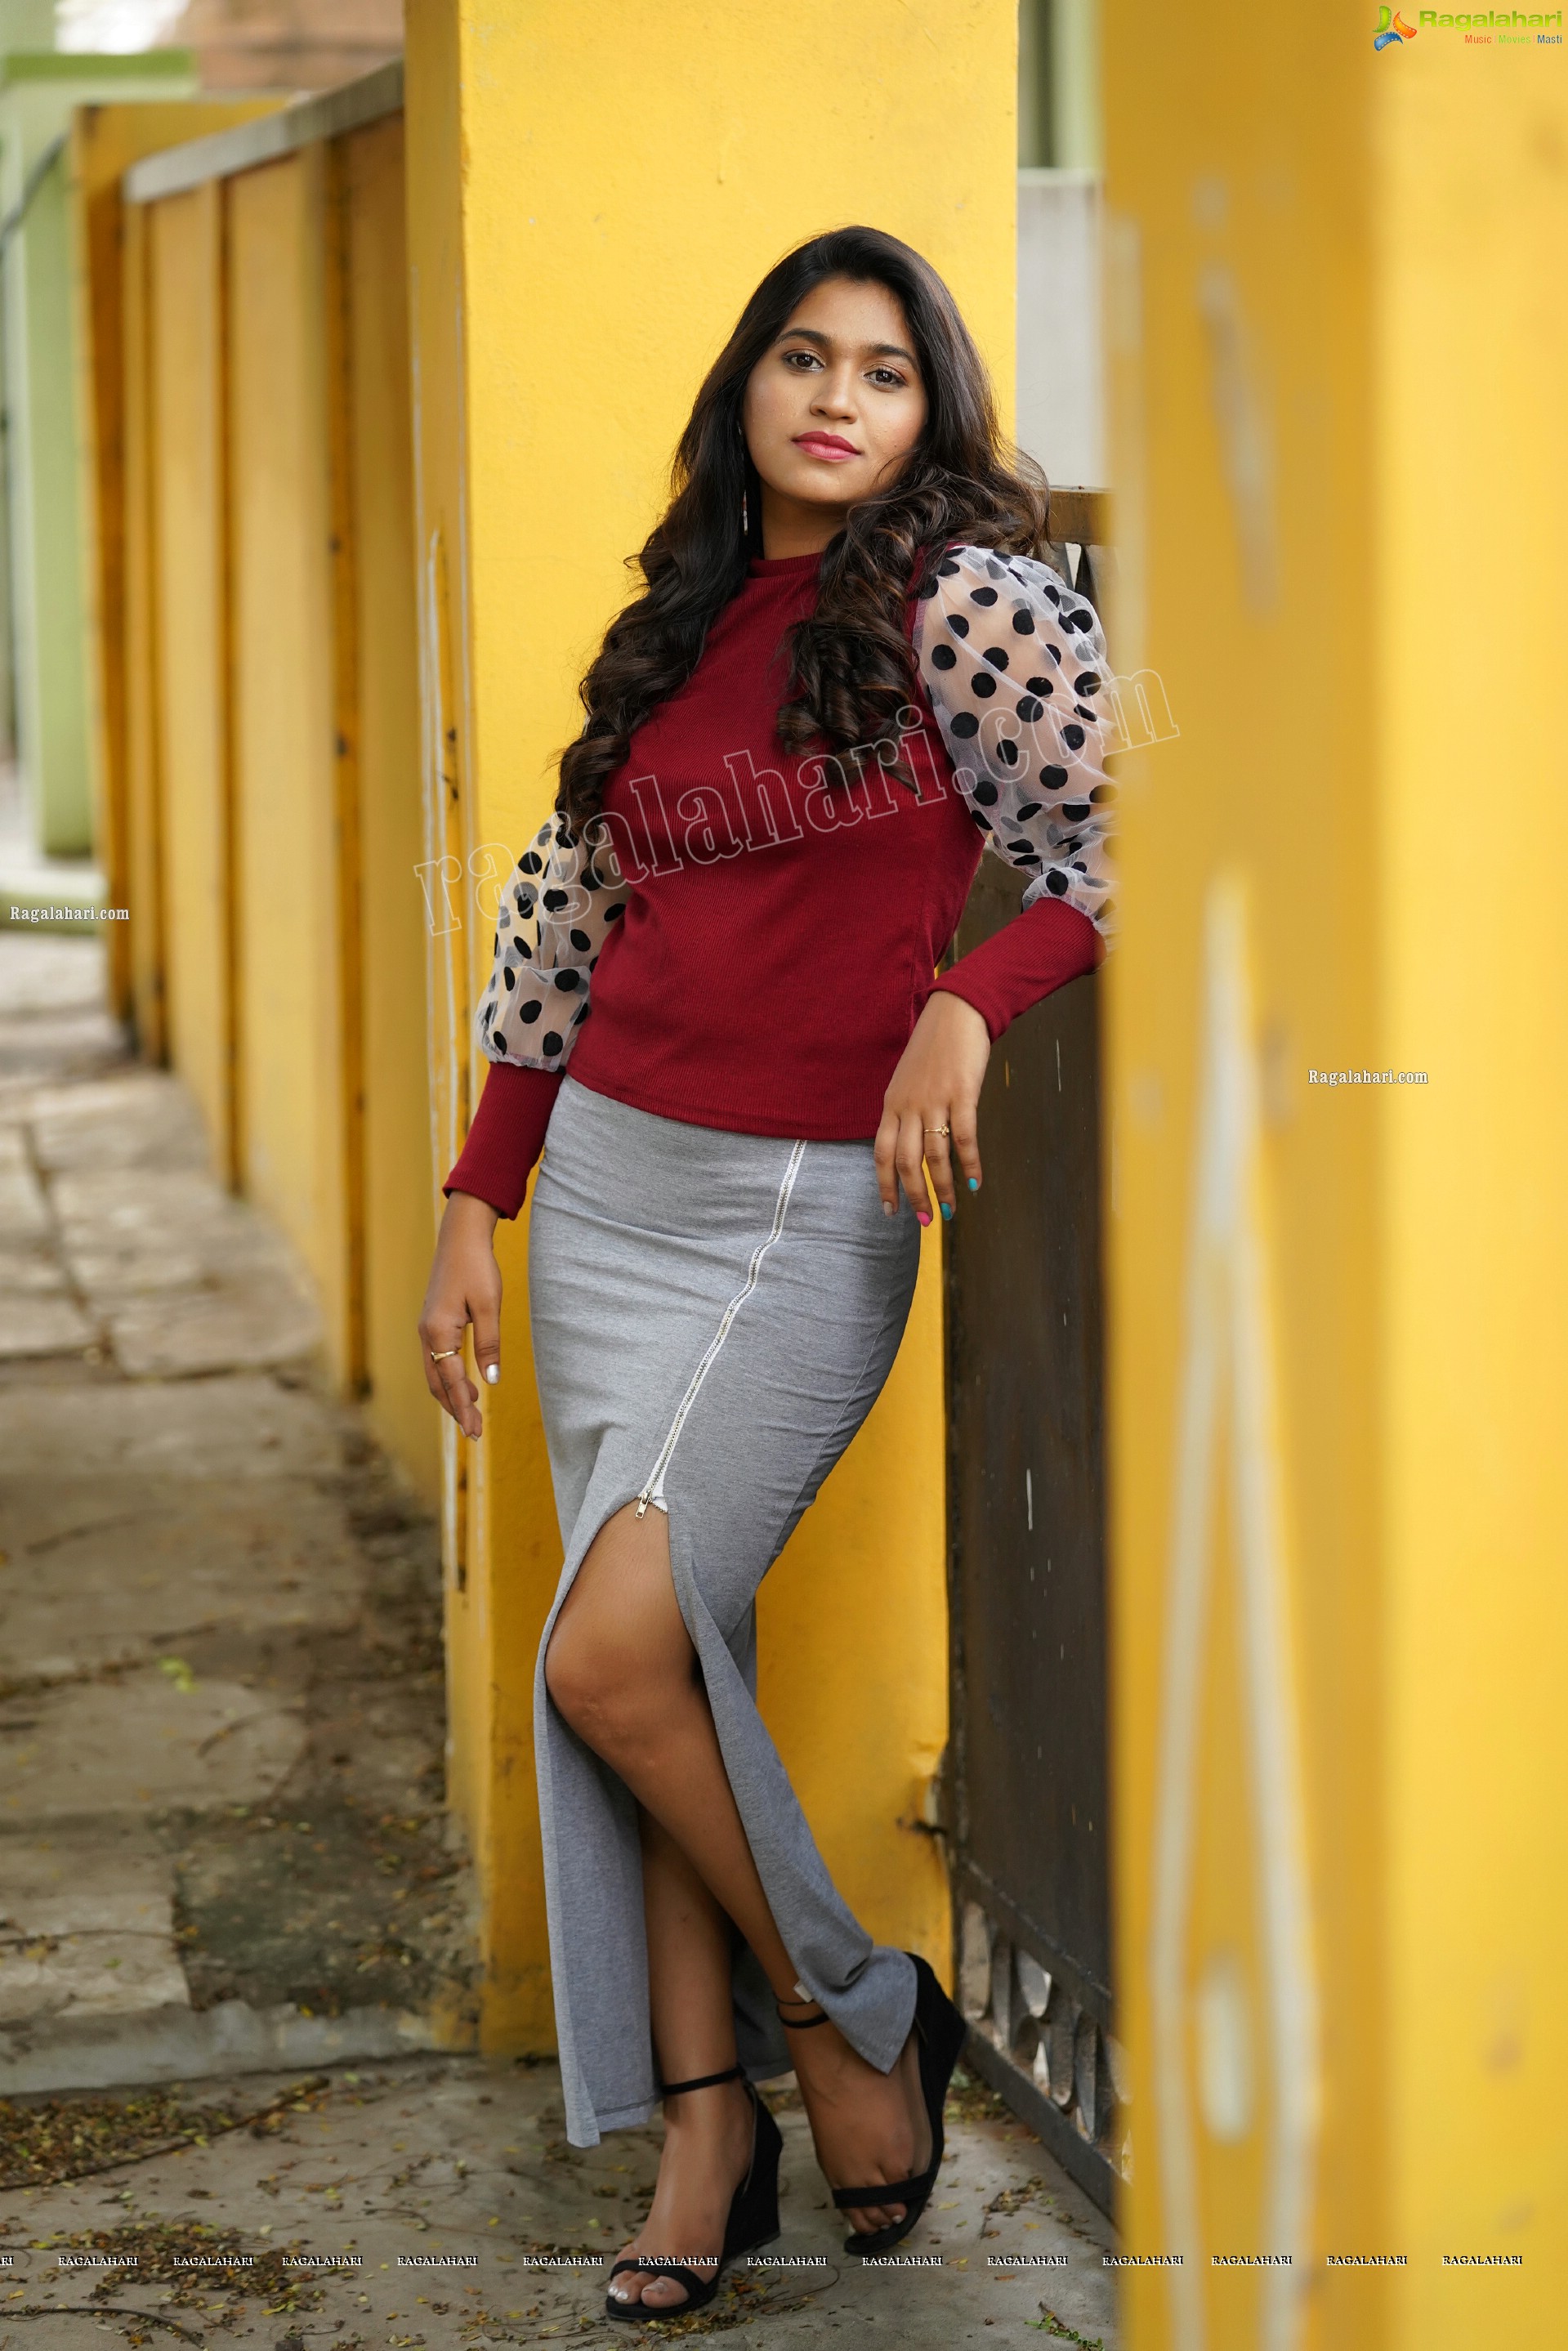 Honey Royal in Gray Side Slit Skirt and Red Top, Exclusive Photoshoot